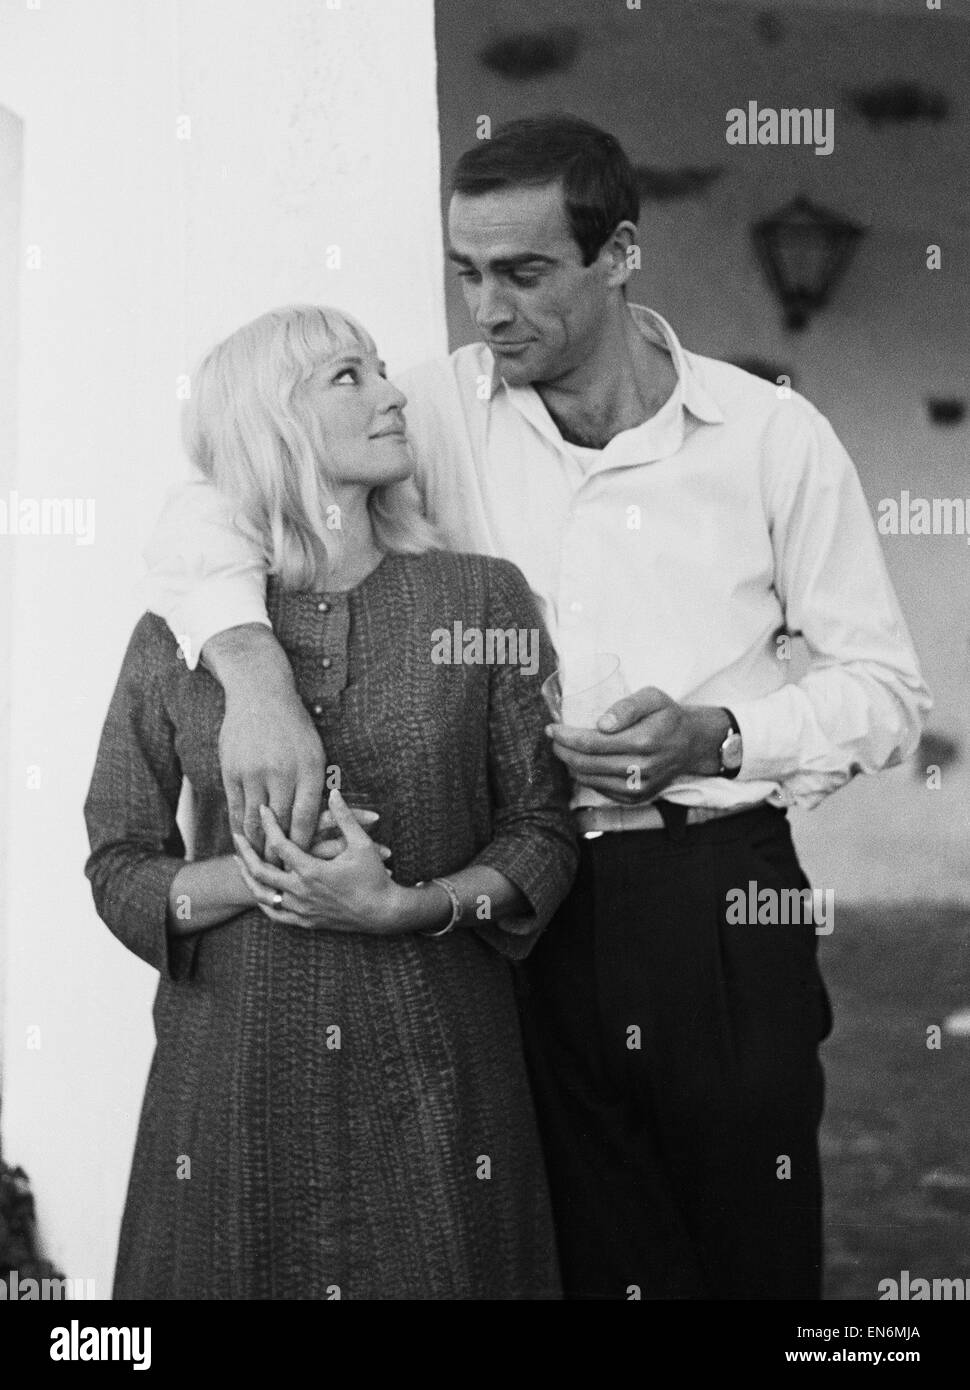 Actor Sean Connery who plays James Bond, pictured with his new bride, actress Diane Cilento on their honeymoon near Marbella in Southern Spain, shortly after their secret wedding in Gibraltar. 2nd December 1962. Stock Photo